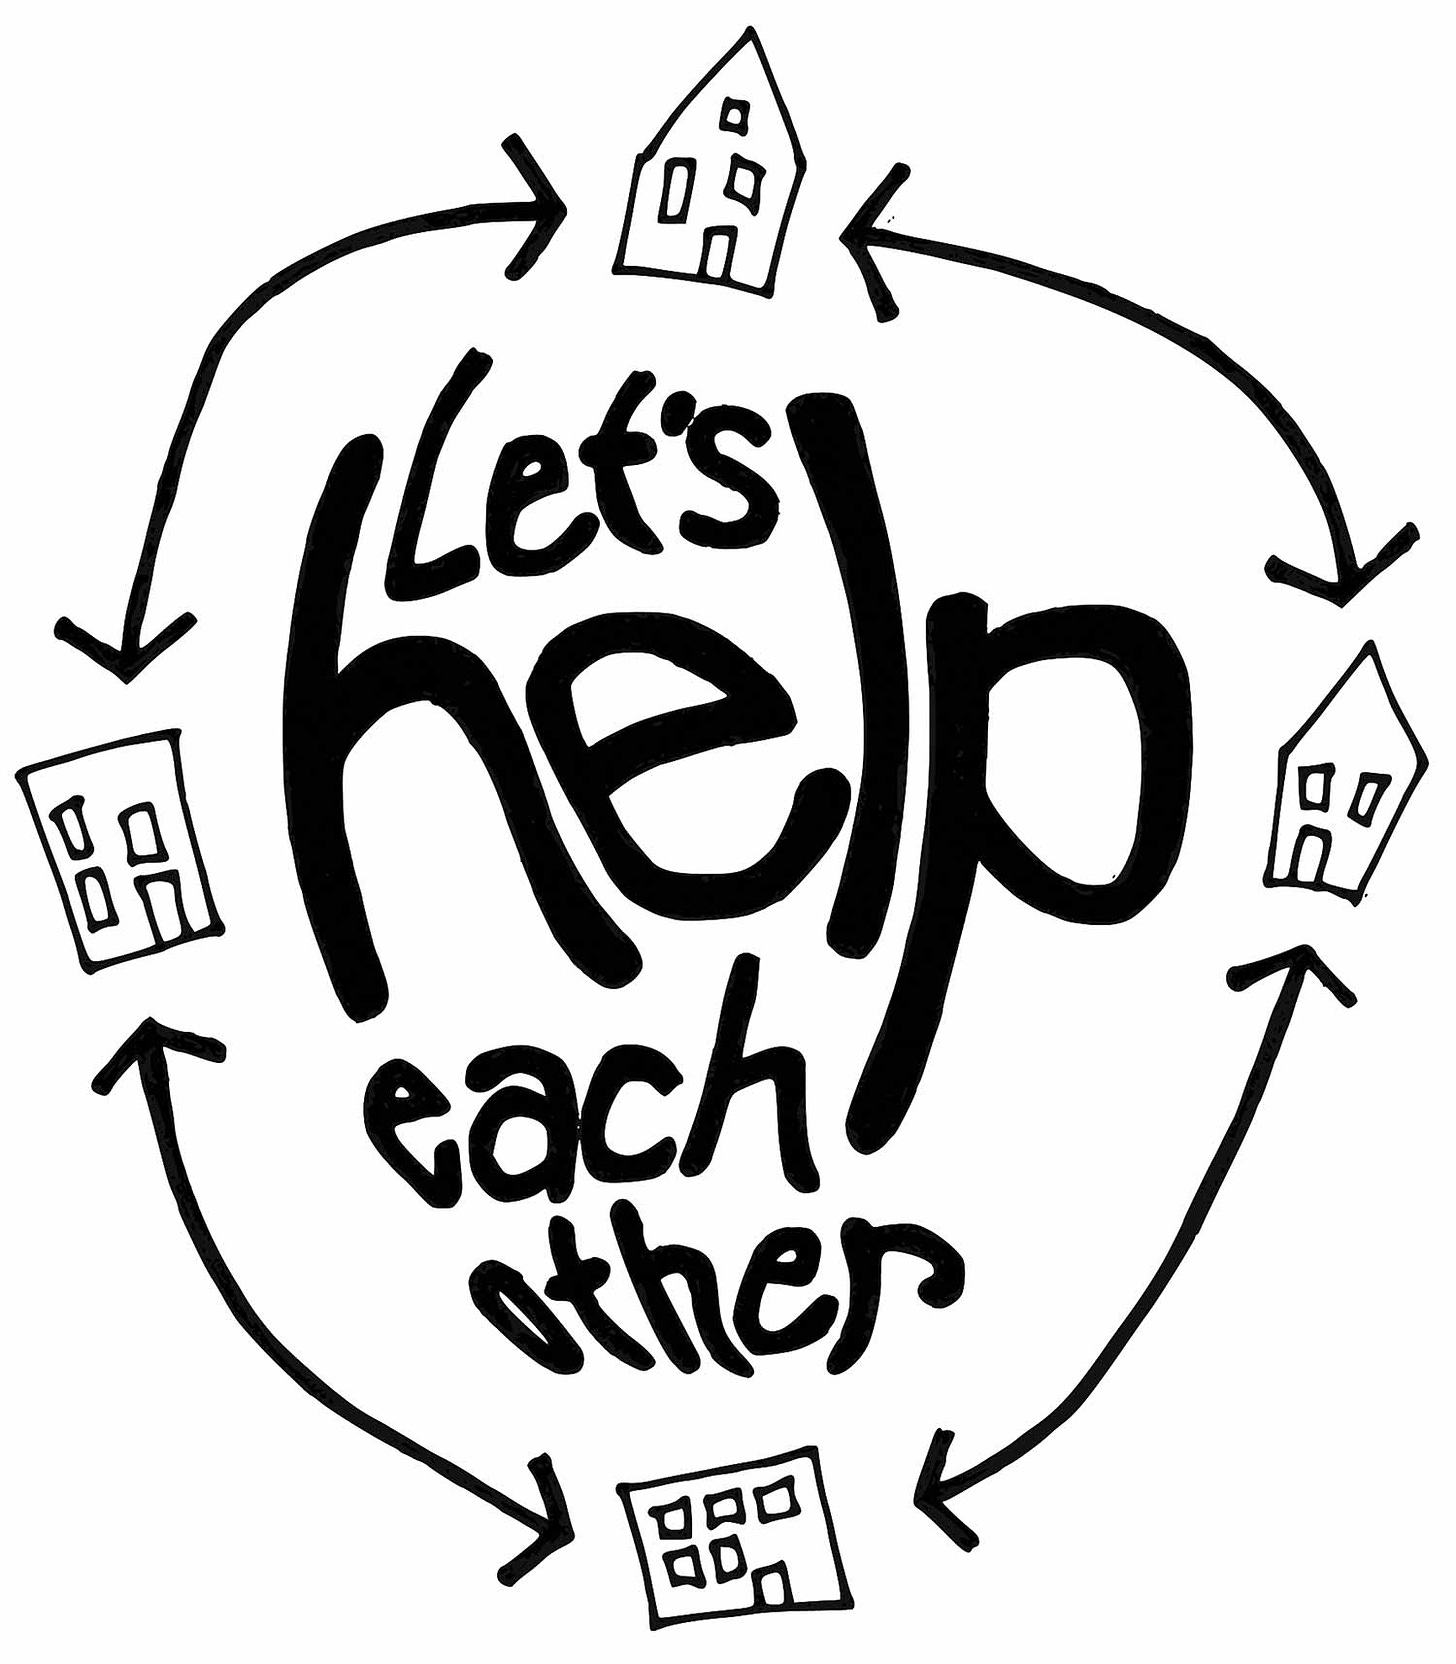 A cycle showing arrows to and from four homes with the words "let's help each other" in the center